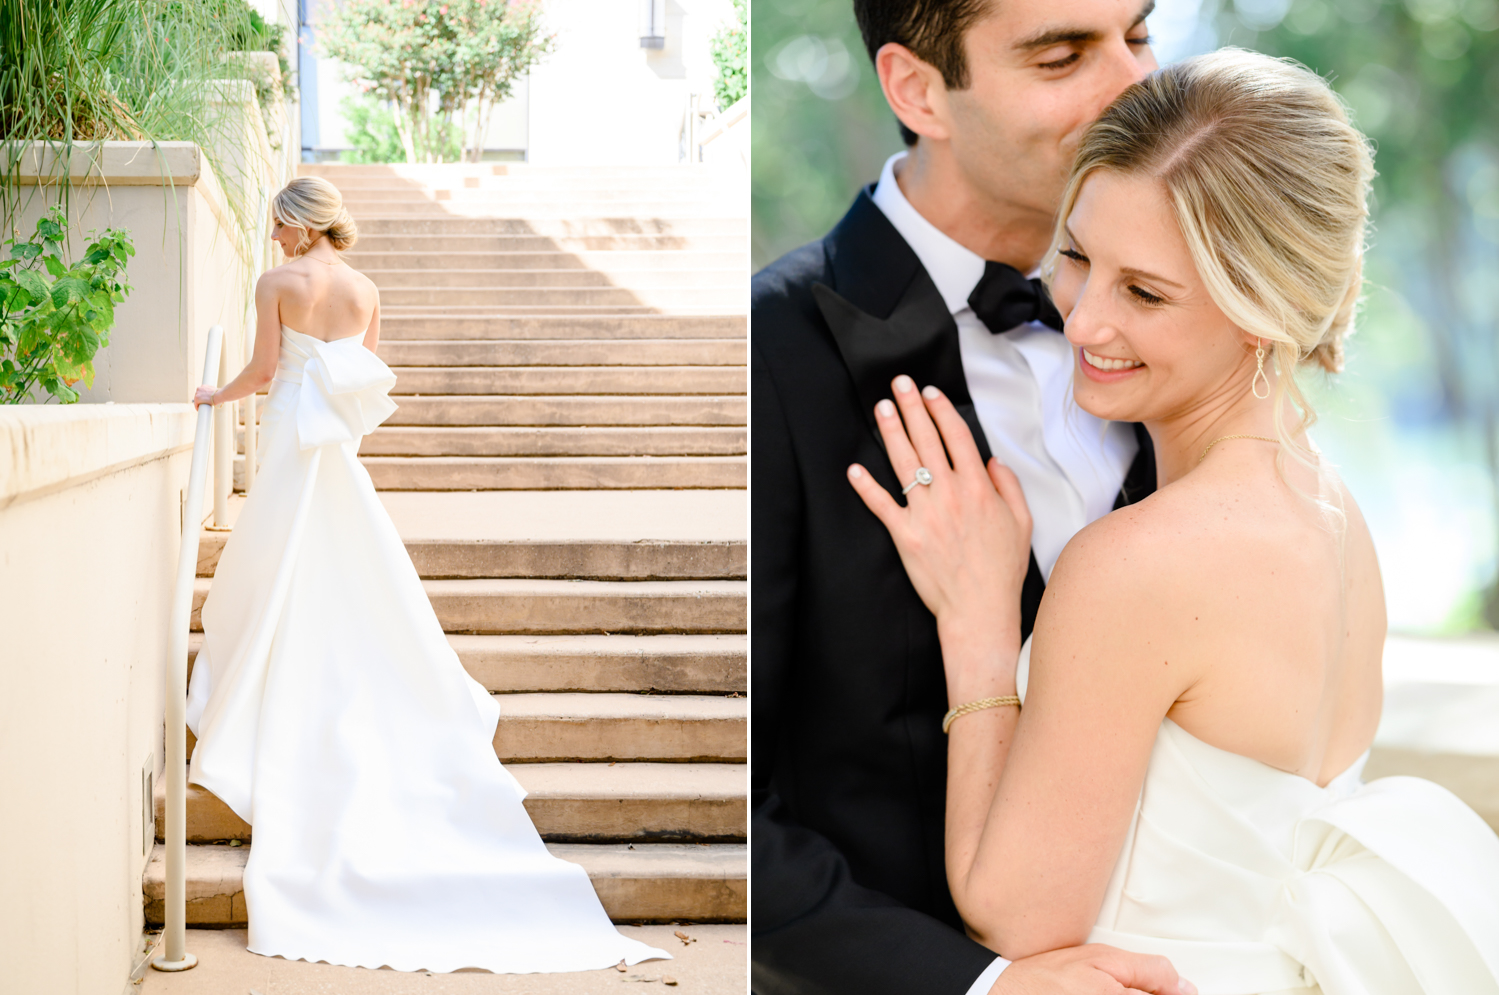 Left: Bride stands on a staircase and shows off the back of her dress with a big bow. Right: Groom kisses bride's forehead as they embrace